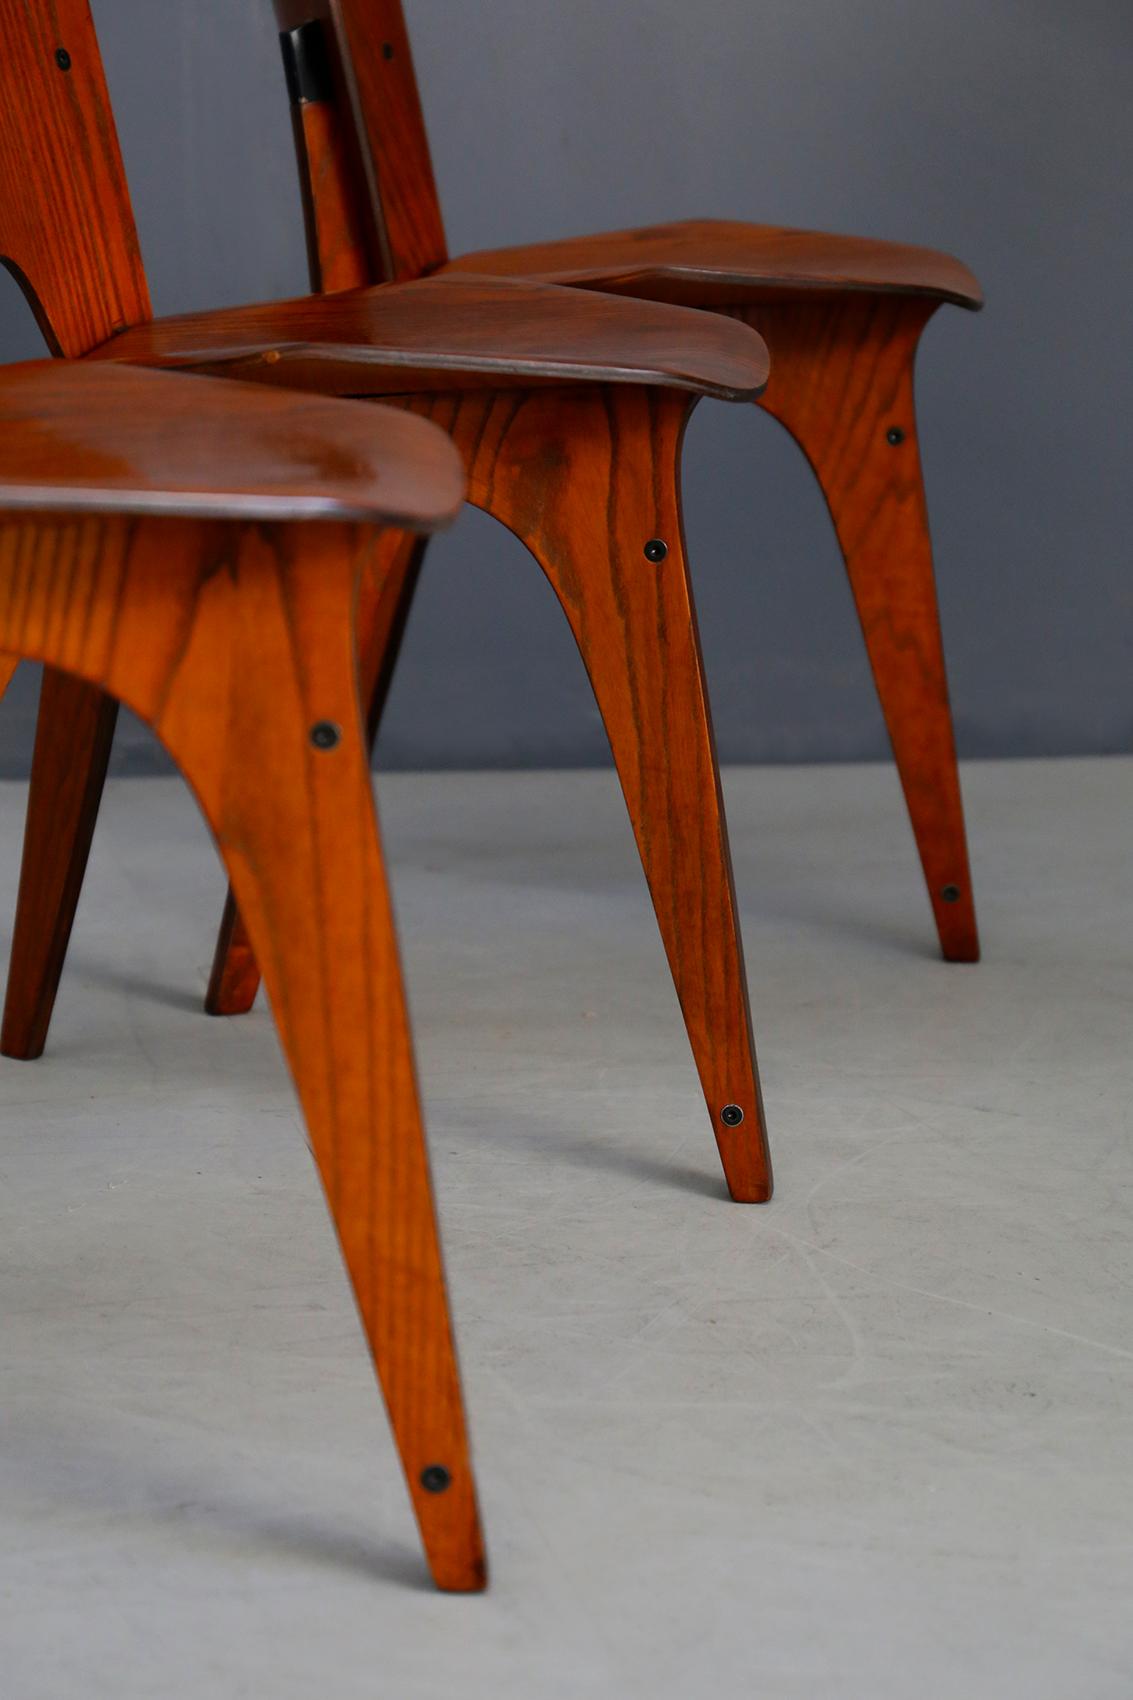 Teak Set of Six Midcentury Chairs by Eugenio Gerli for Tecno, Published, 1958